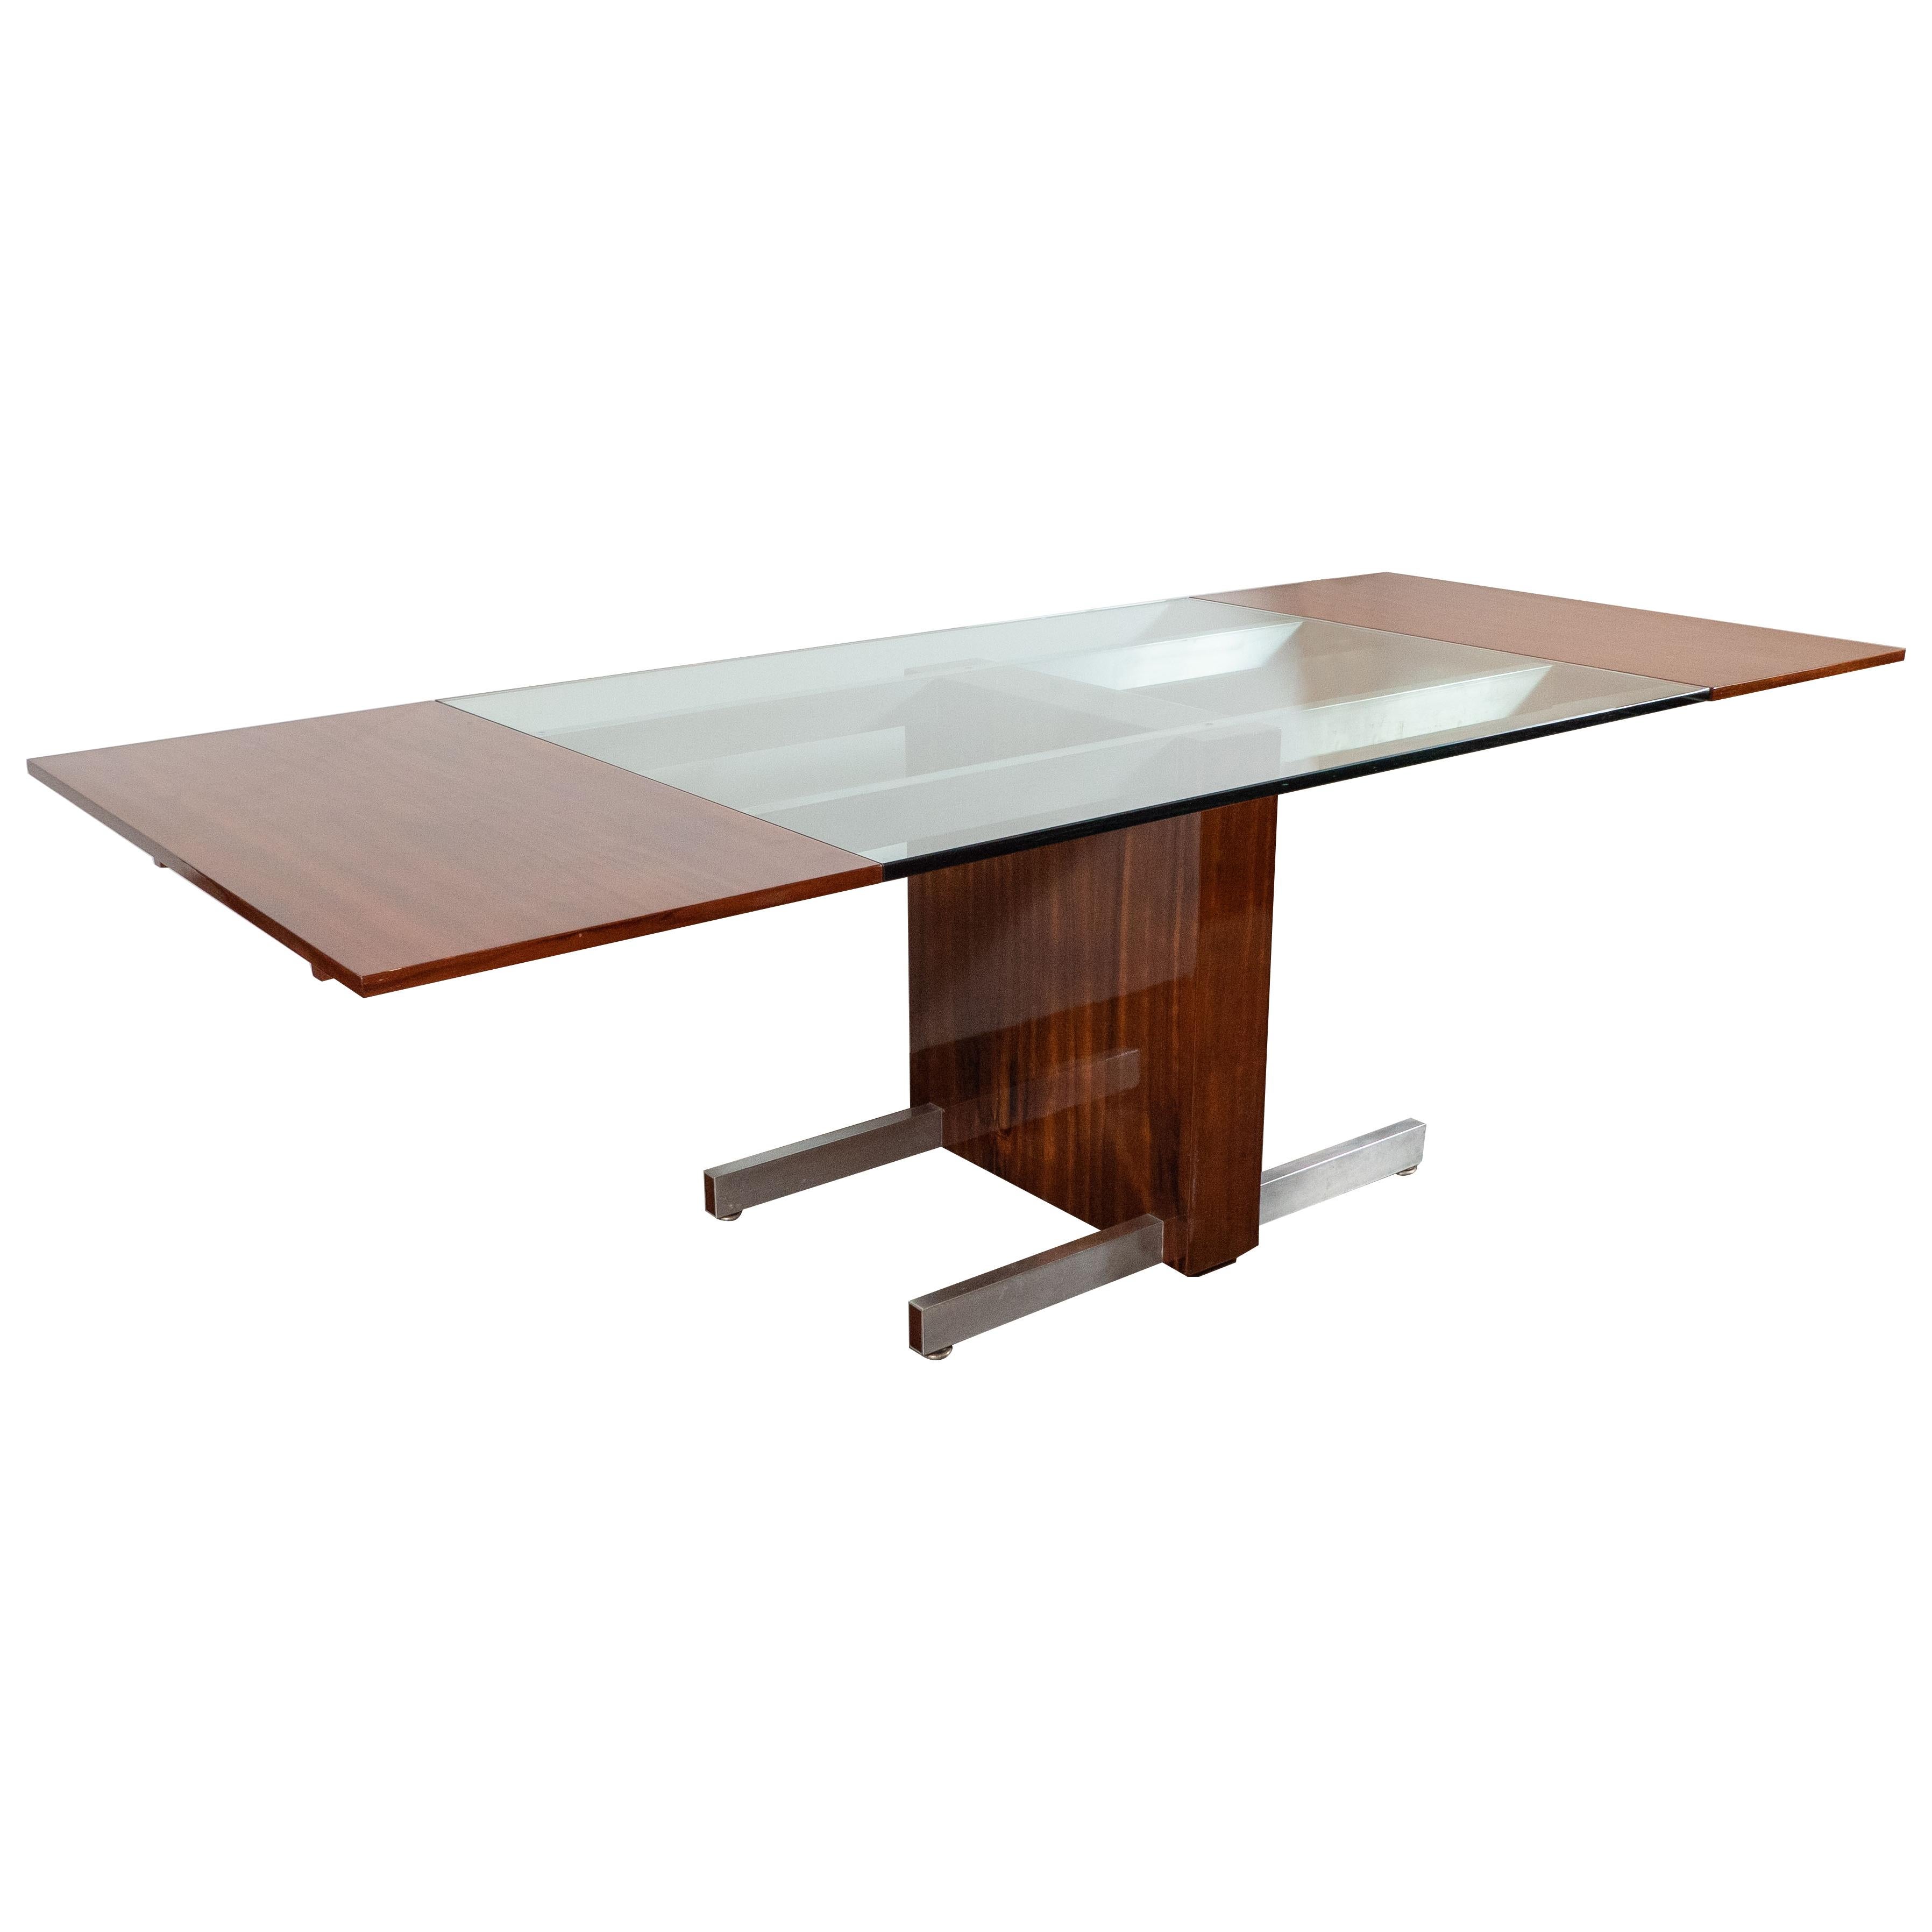 This graphic and iconic dining/ console table was realized by the inimitable Vladimir Kagan, in the United States, circa 1970. It features a rectangular top with a glass center framed by two bookmatched walnut ends. The top is supported by a solid